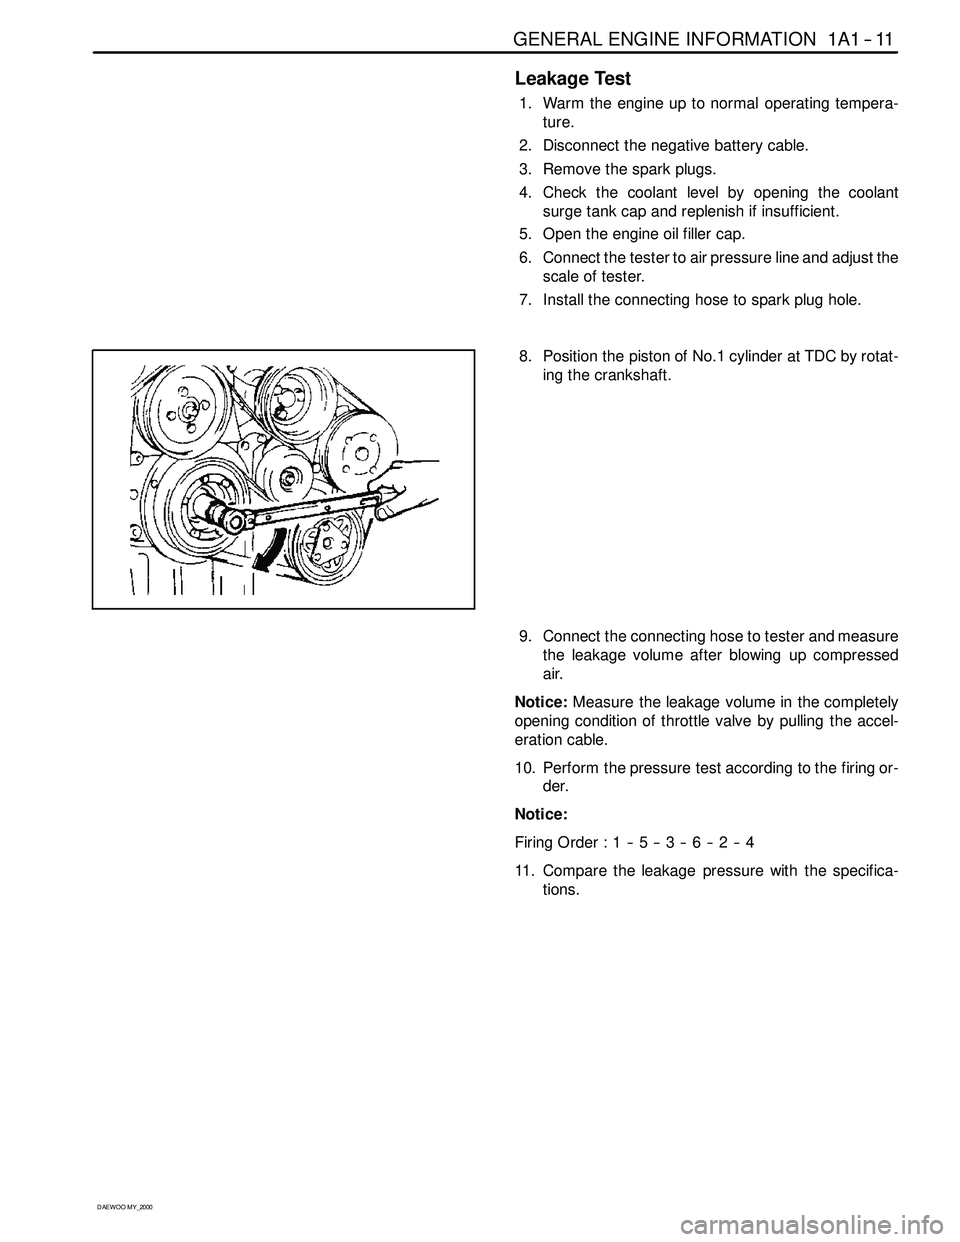 SSANGYONG KORANDO 1997  Service Repair Manual GENERAL ENGINE INFORMATION 1A1 -- 11
D AEW OO M Y_2000
Leakage Test
1. Warm the engine up to normal operating tempera-
ture.
2. Disconnect the negative battery cable.
3. Remove the spark plugs.
4. Che